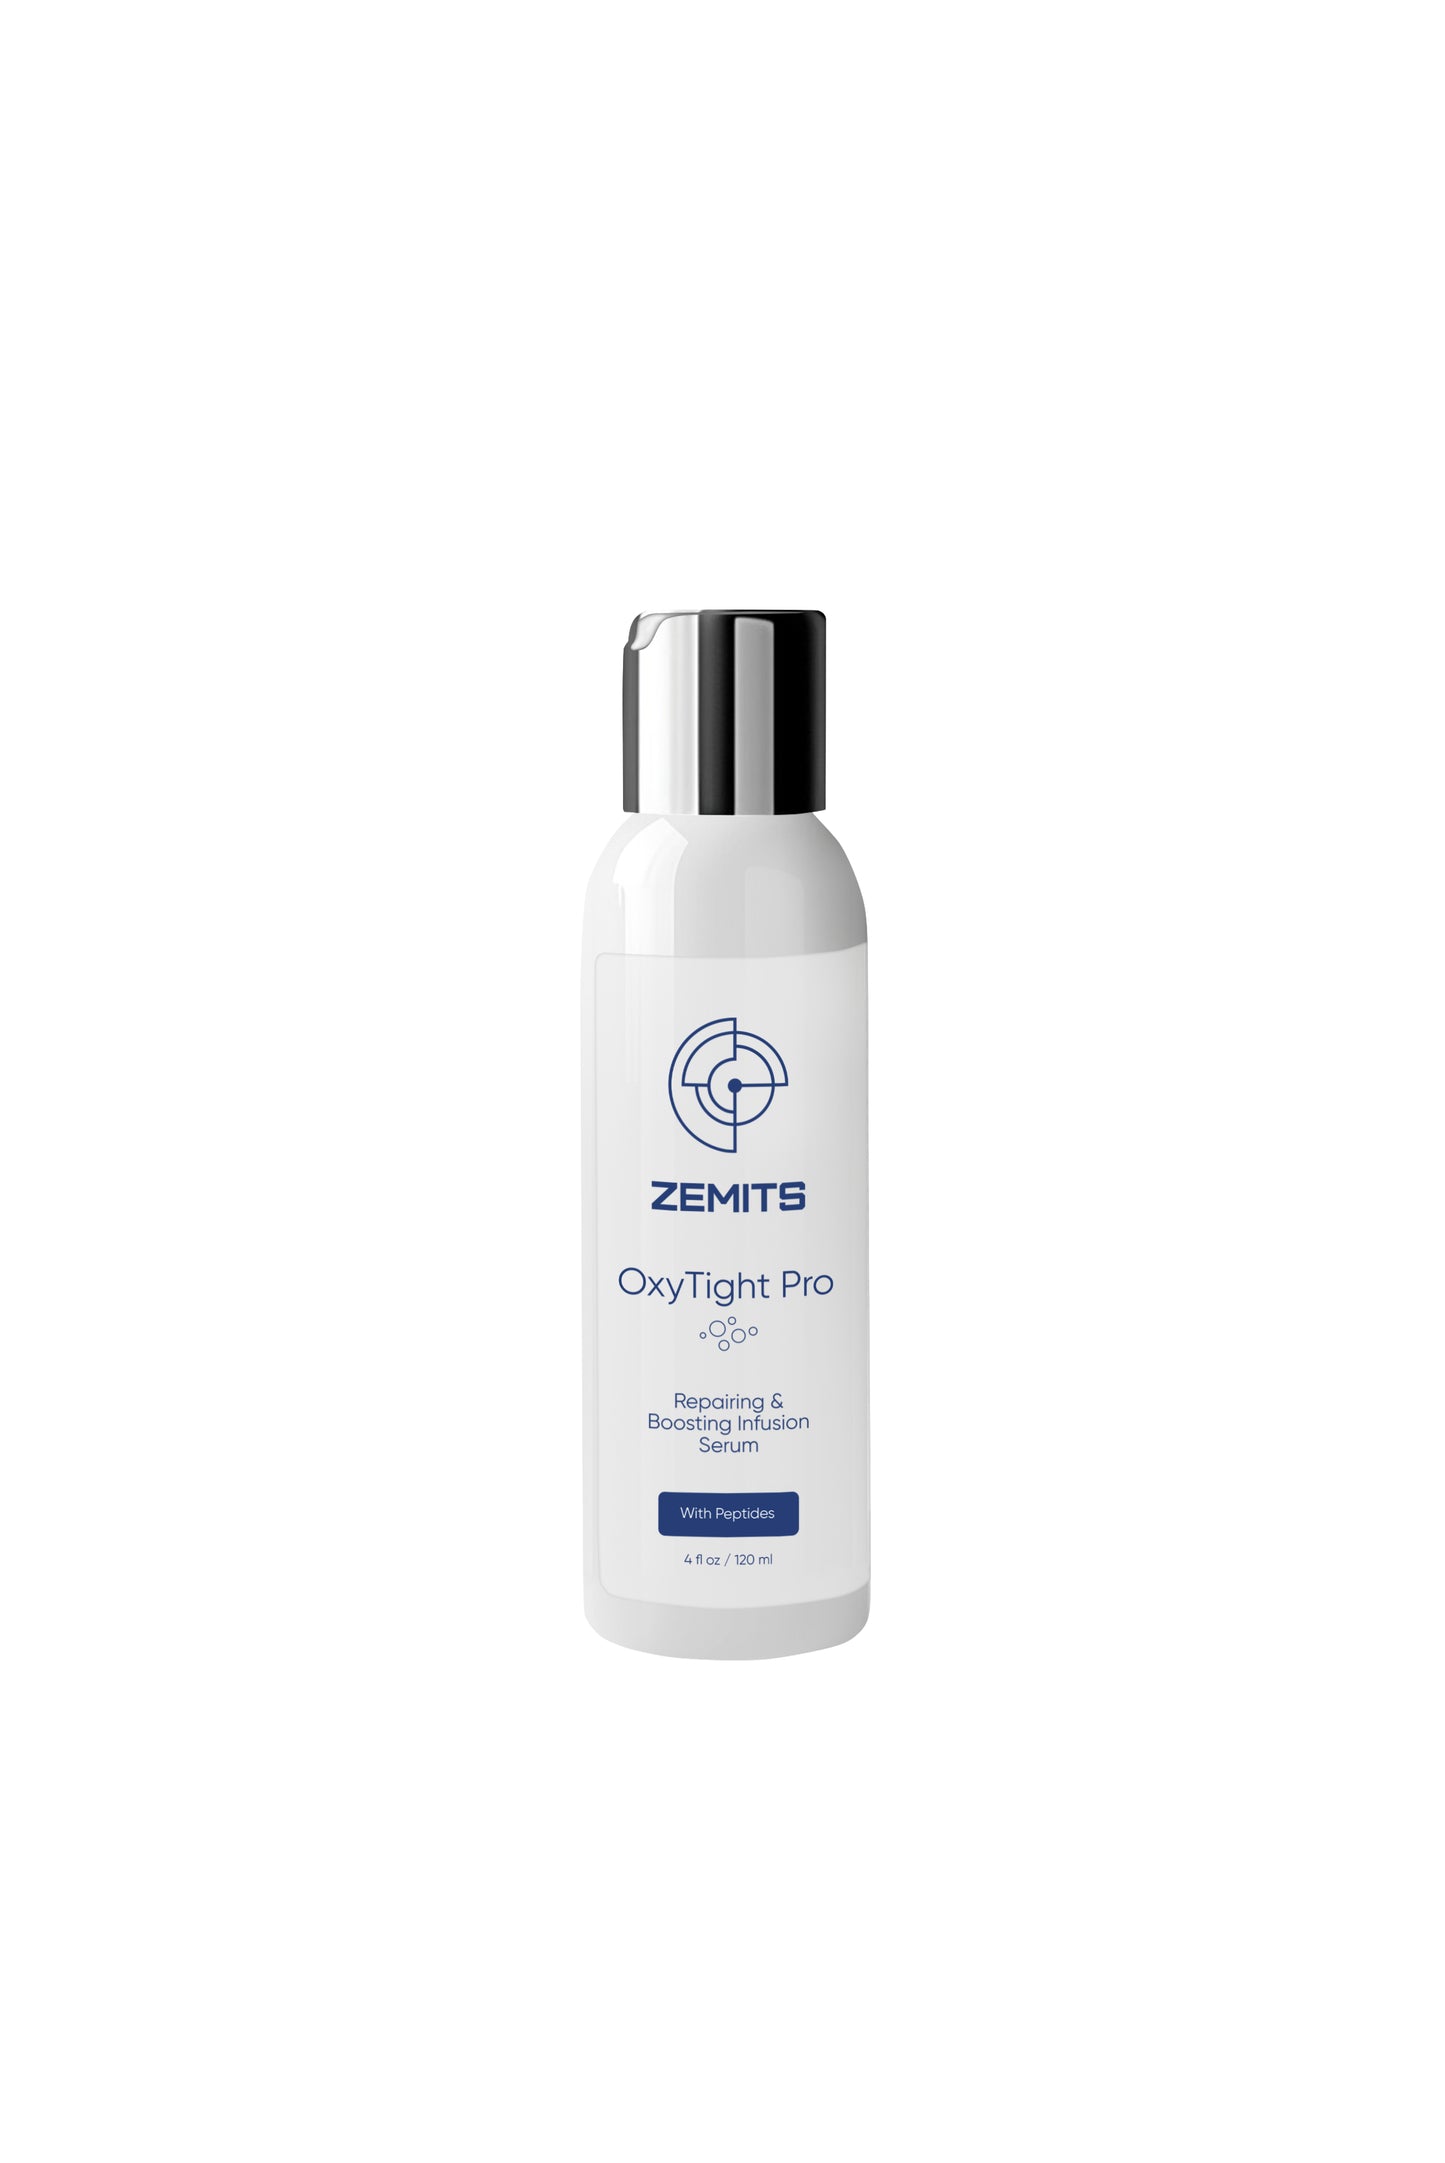 Zemits OxyTight Pro Repairing & Boosting Infusion Serum with Peptides, 4 fl oz